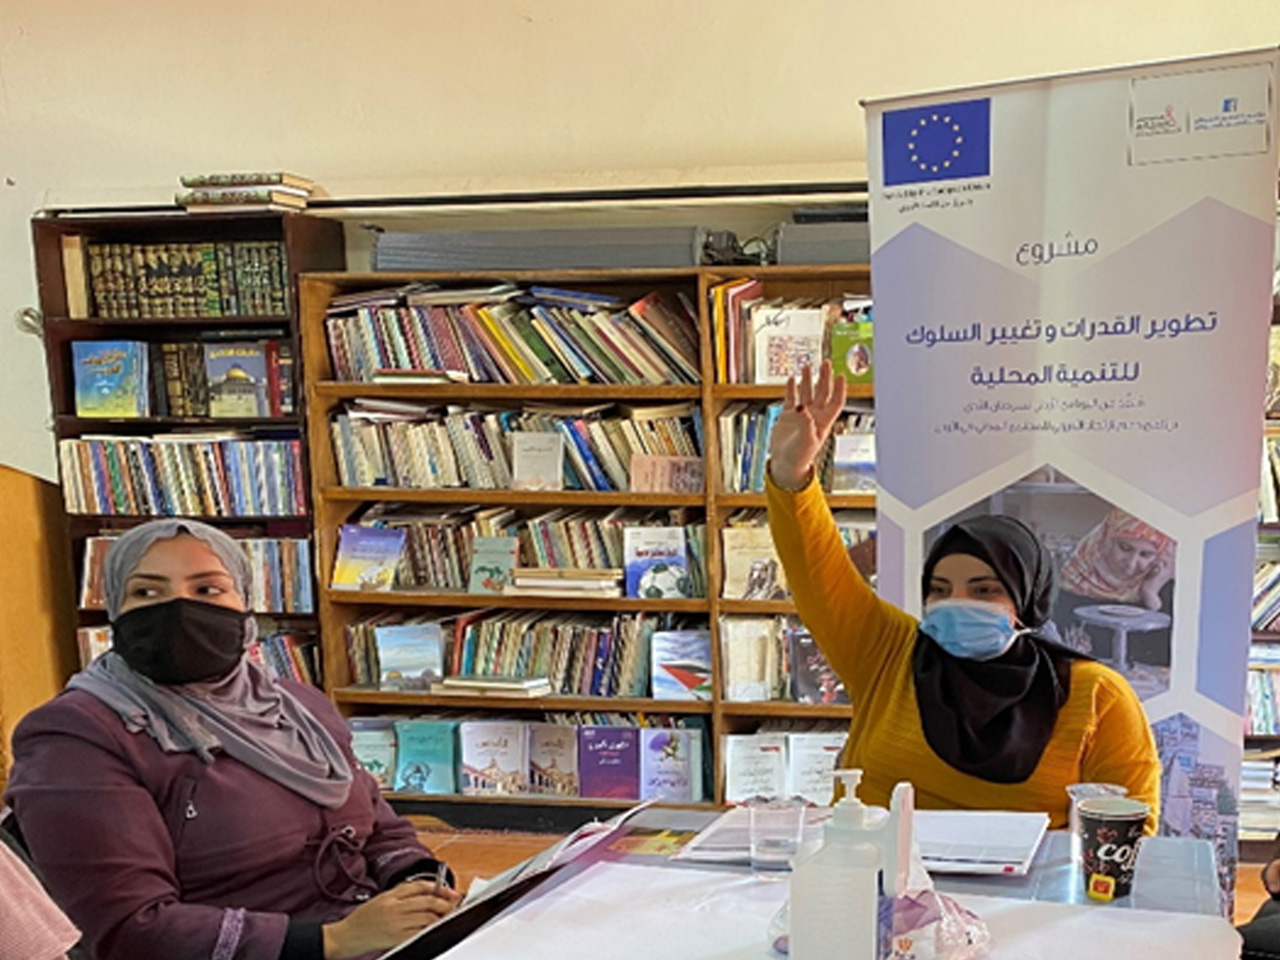 Jordan Breast Cancer Program completes “Agents of change” Training workshop in al Tafilah governorate, under the EU’s Support for Civil Society Organizations Project